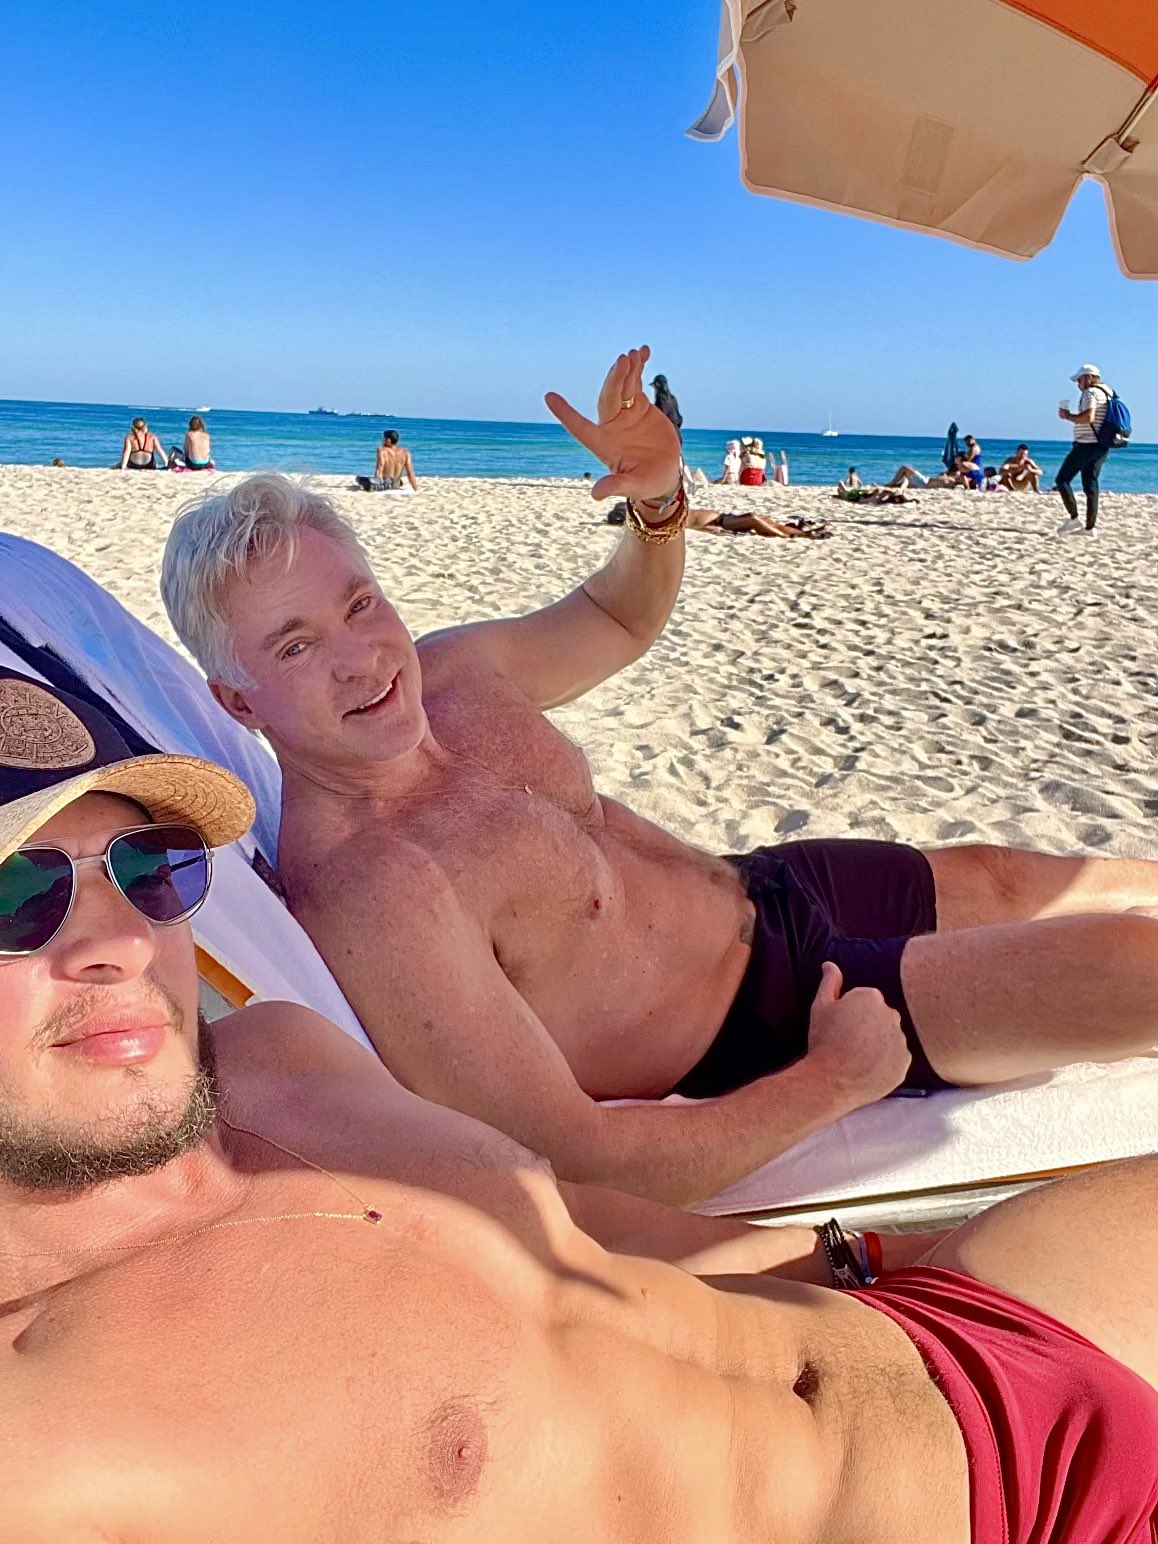 The 62-year-old weather anchor posted a beach photo to X and wished his followers a happy New Year